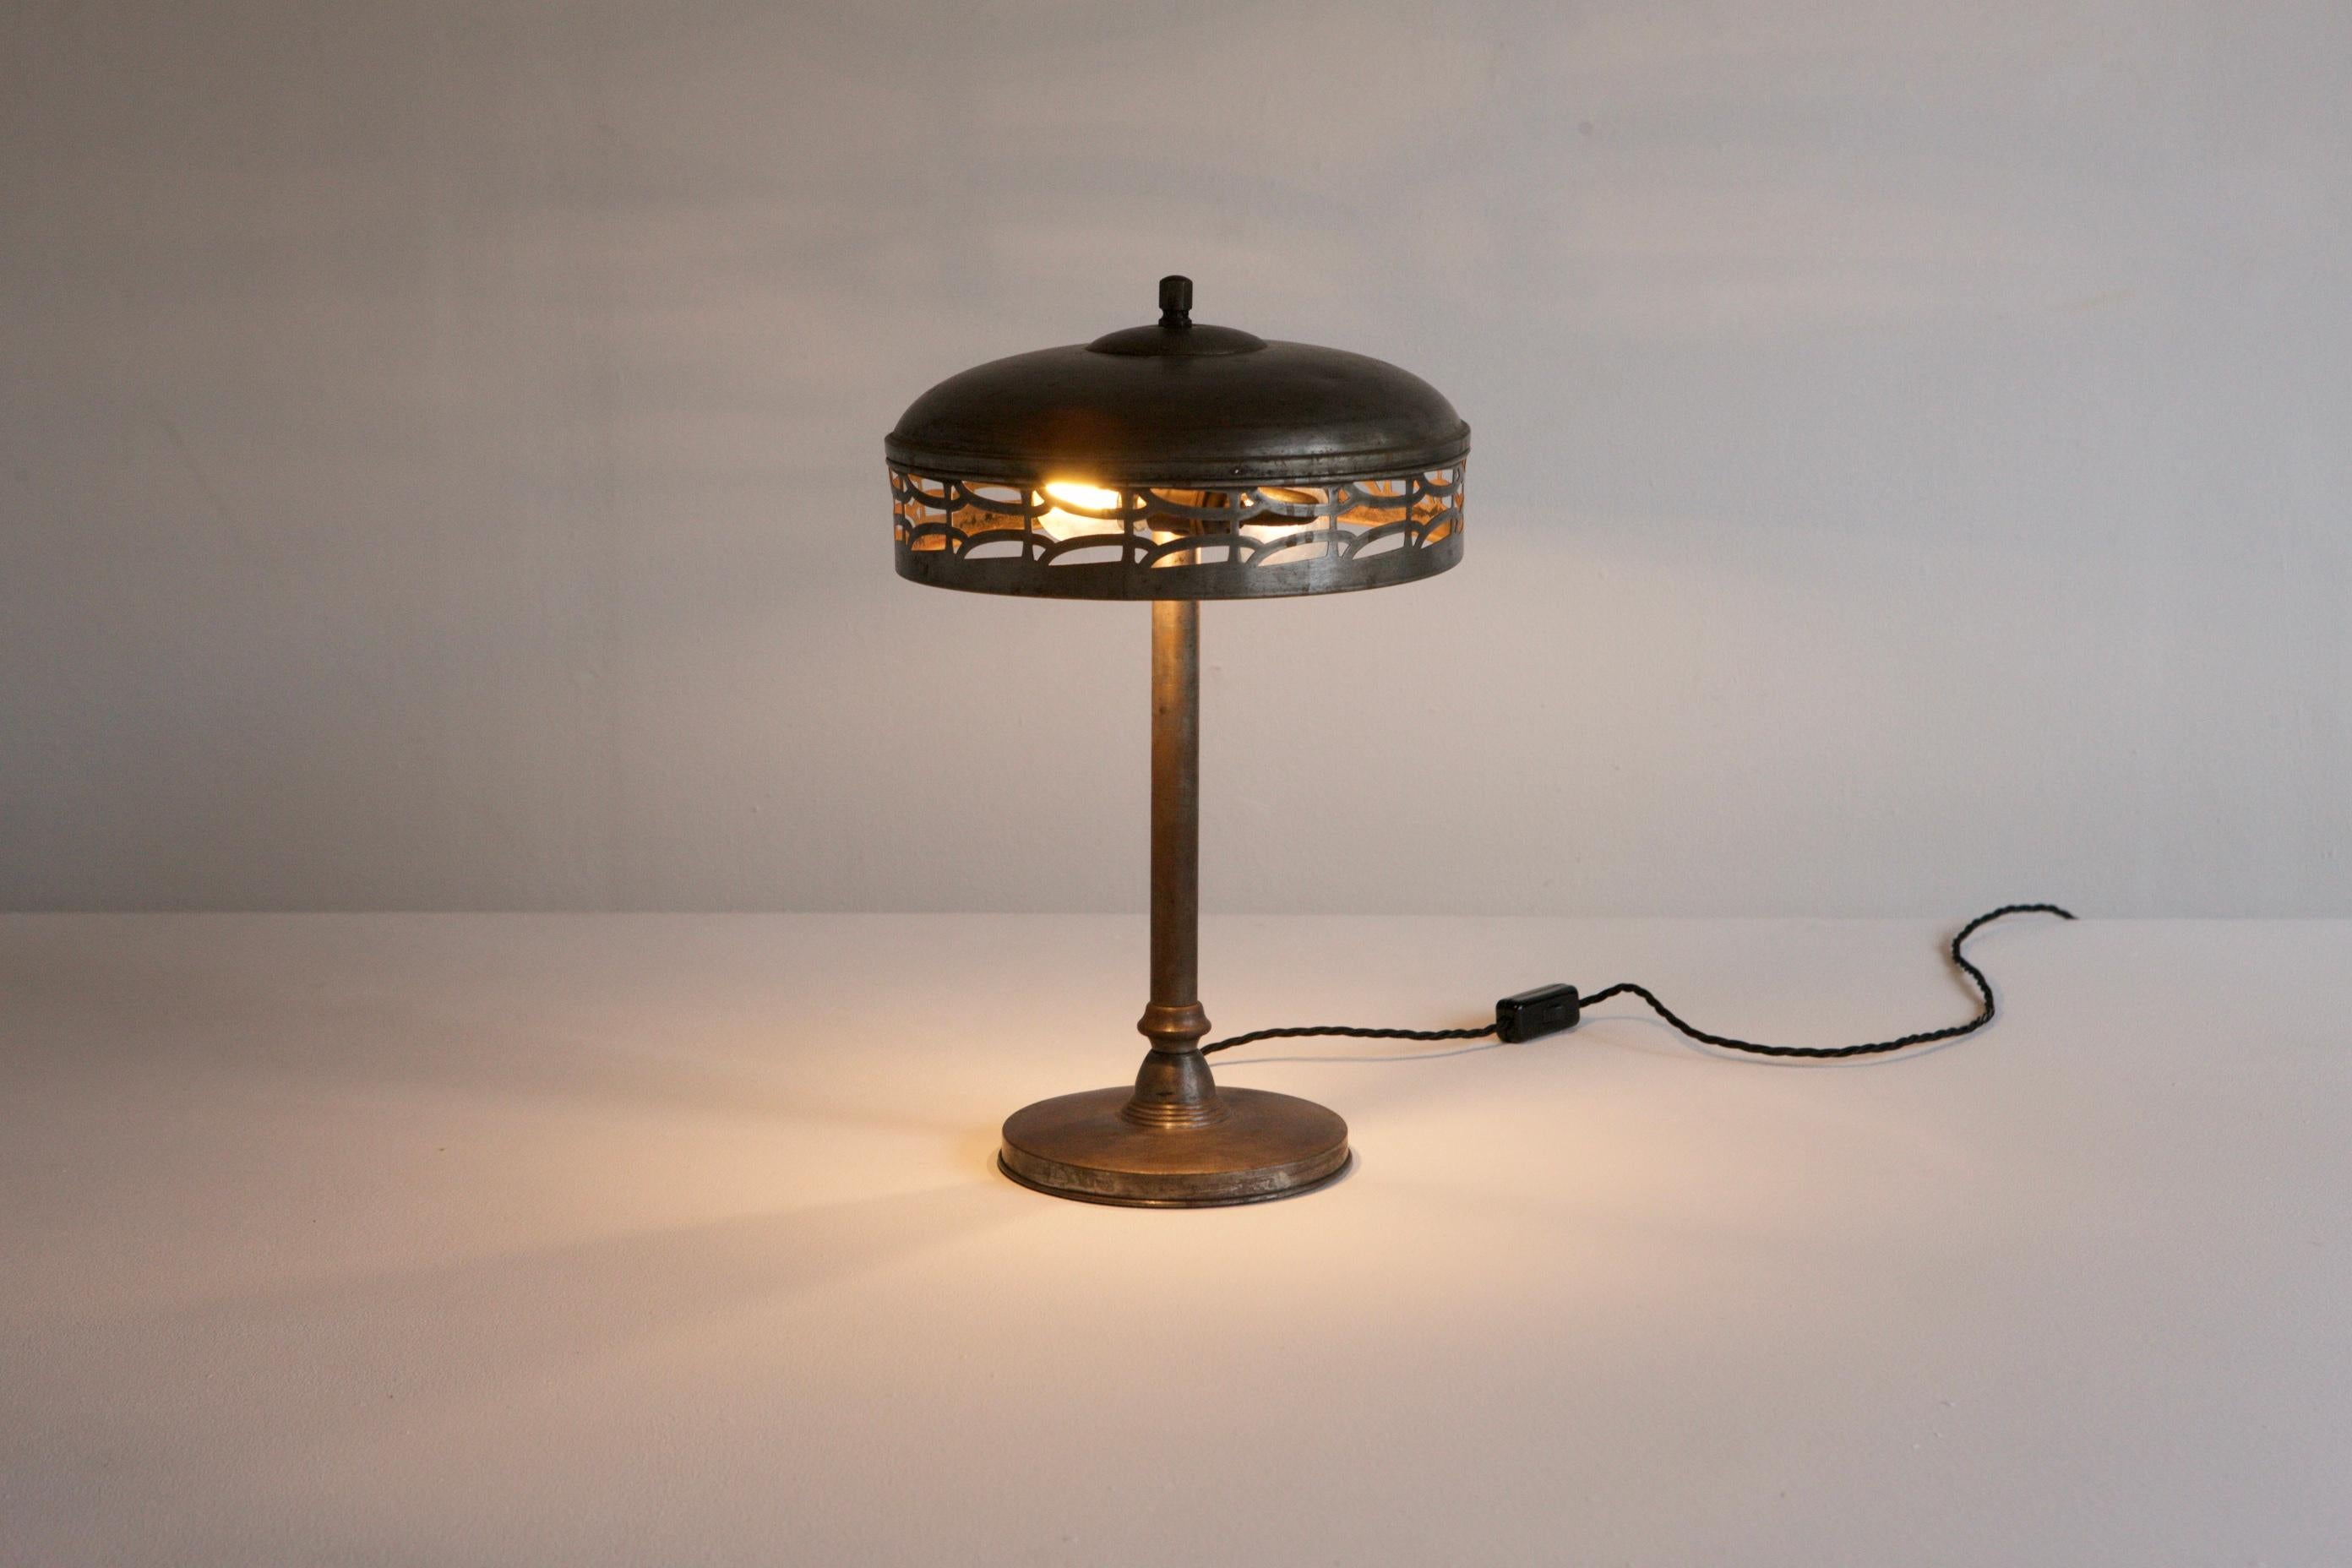 Early Modernist Table Lamp, Viennese Style 1